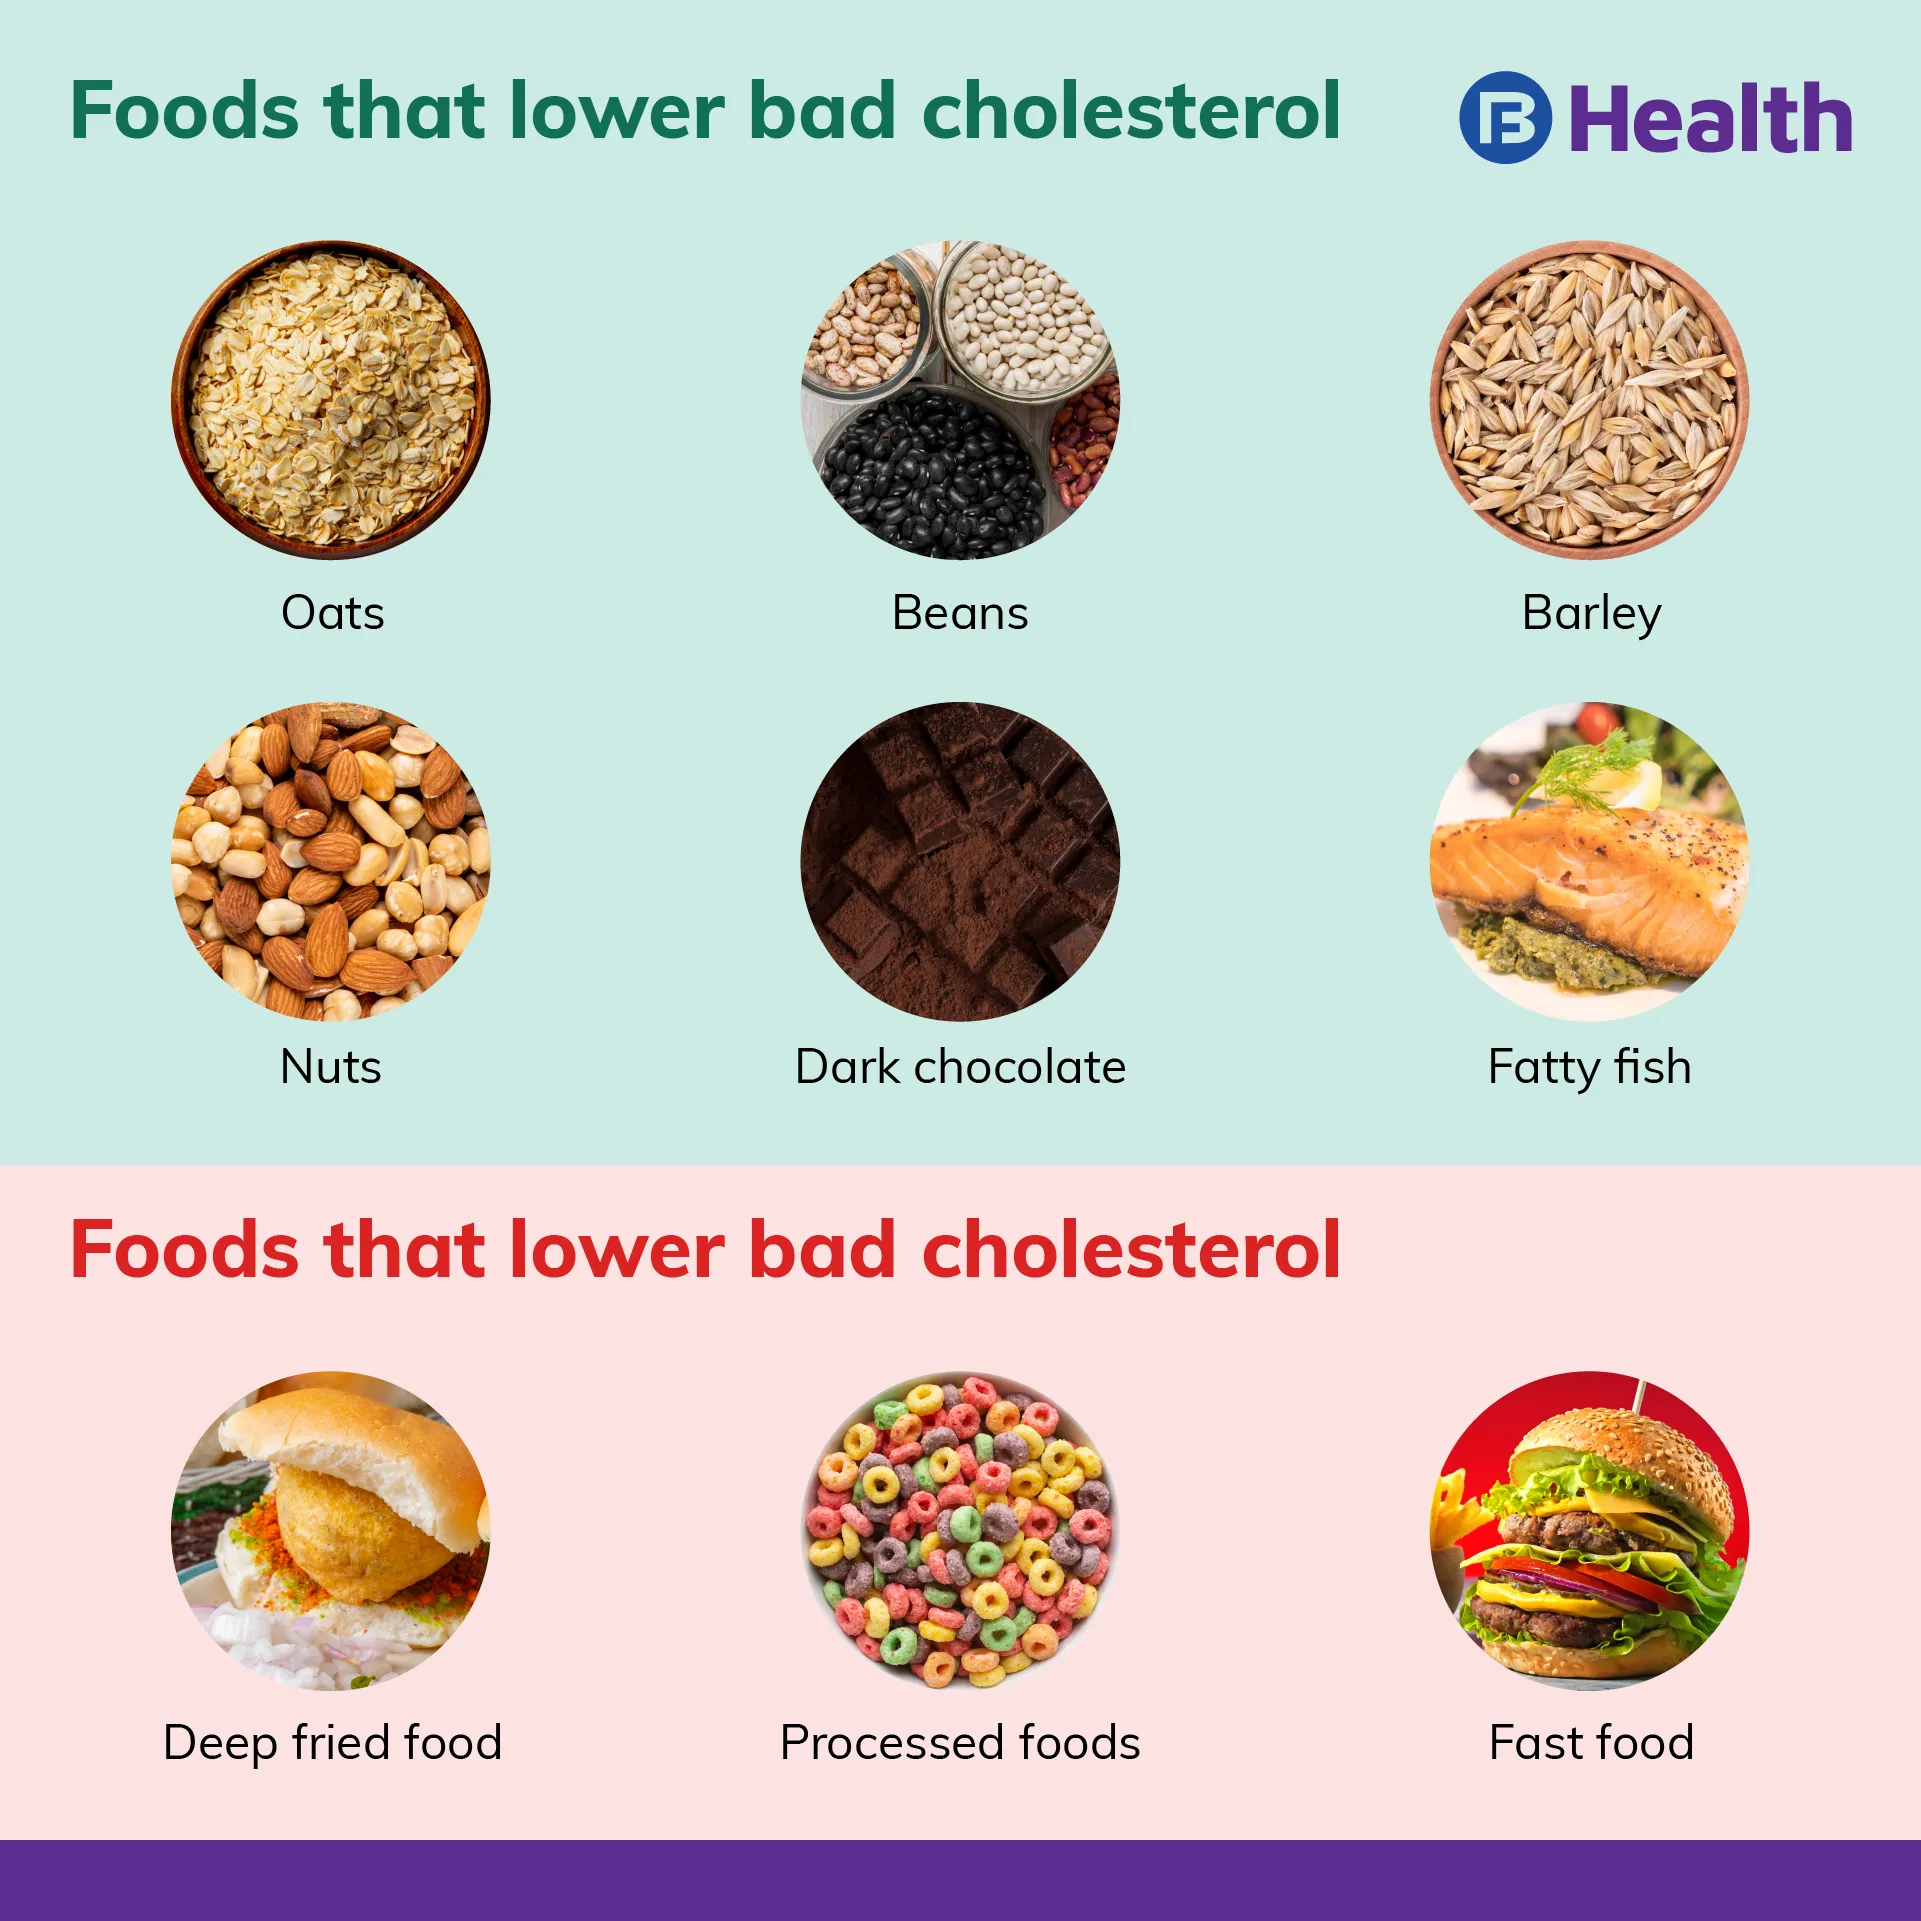 foods that lower bad cholesterol infographic